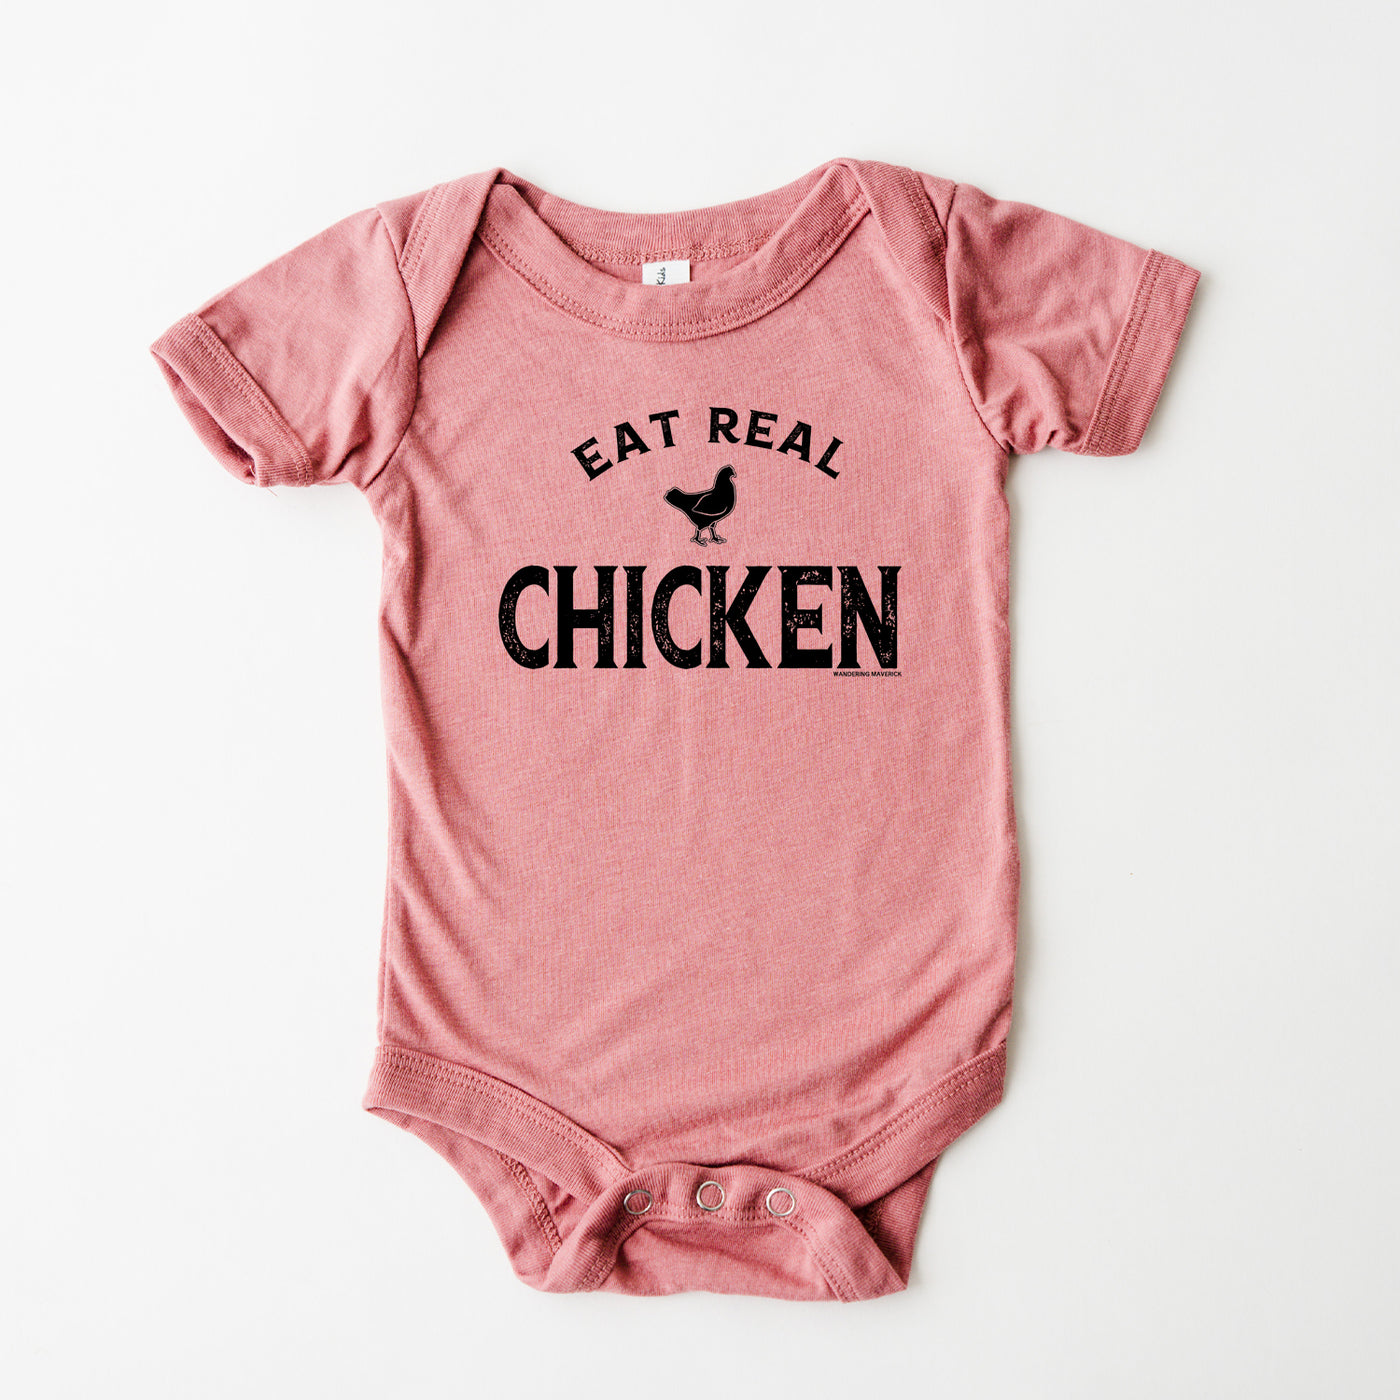 Eat Real Chicken One Piece/T-Shirt (Newborn - Youth XL) - Multiple Colors!